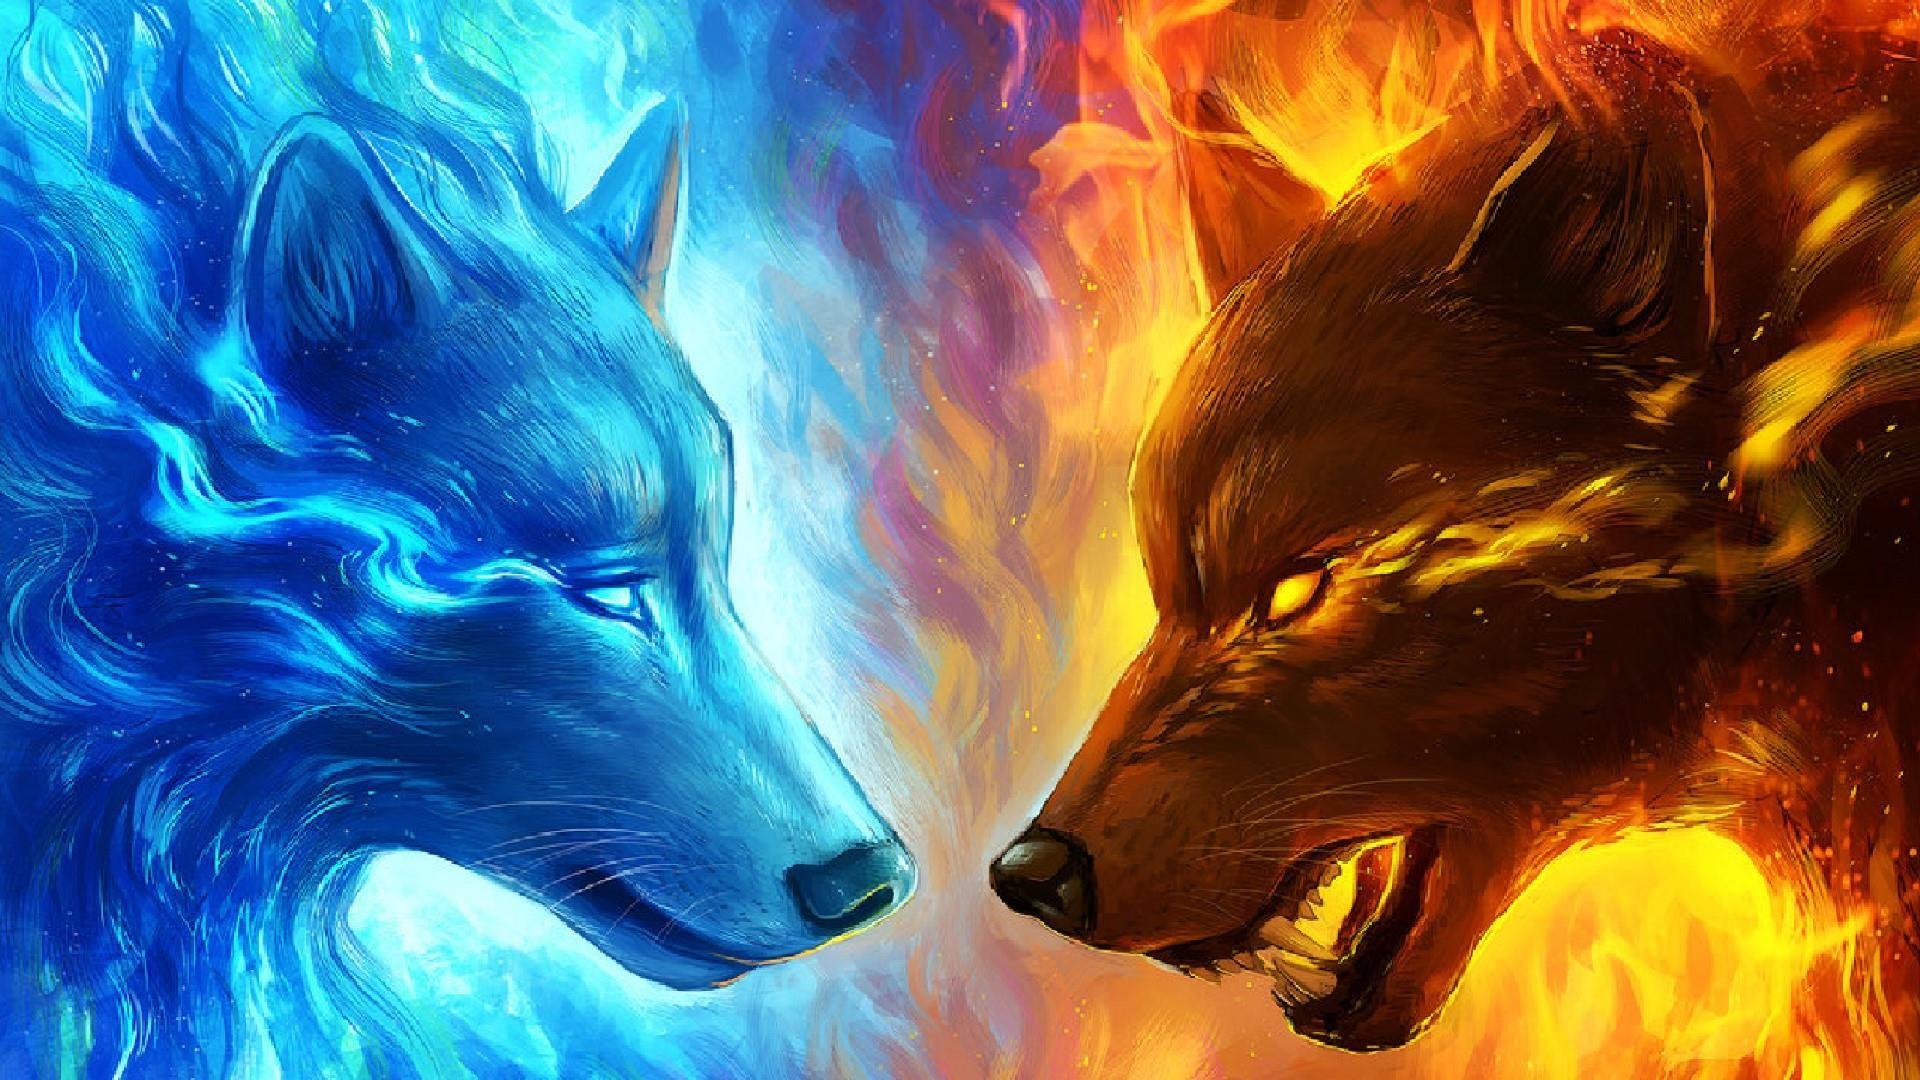 Water and Fire Wolf Wallpaper Free Water and Fire Wolf Background